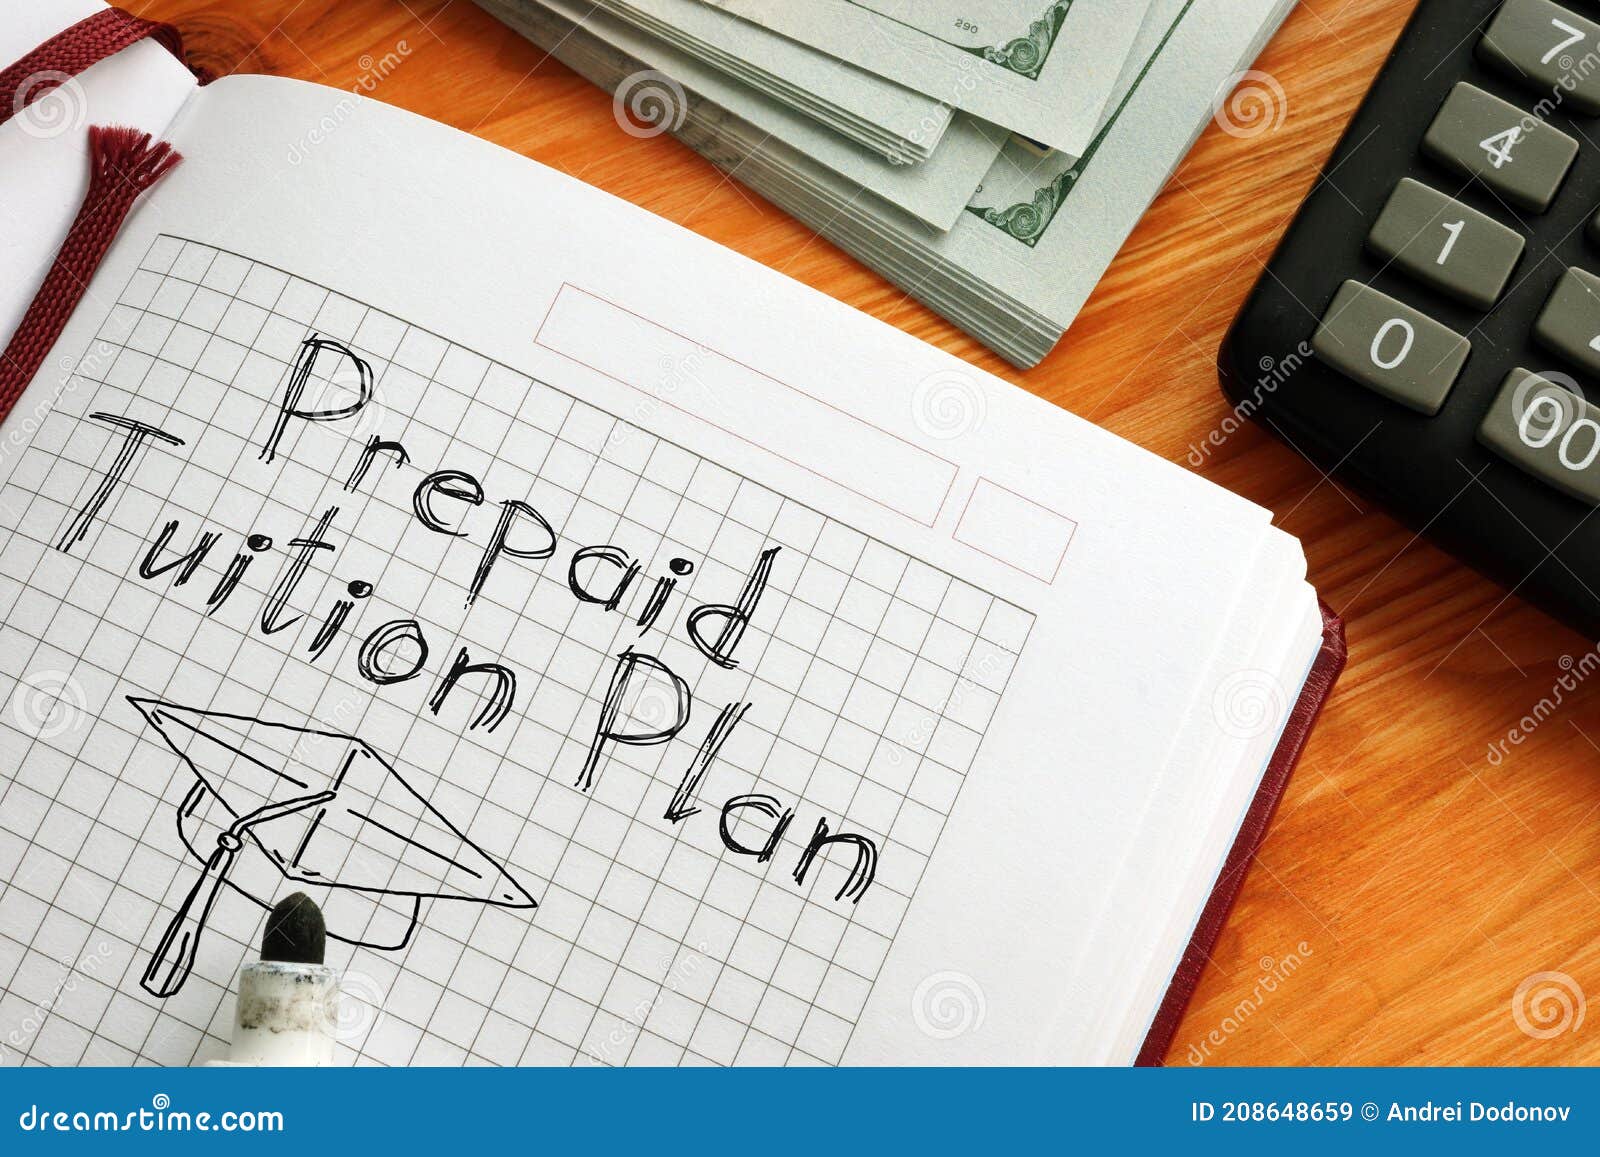 tuition centre business plan